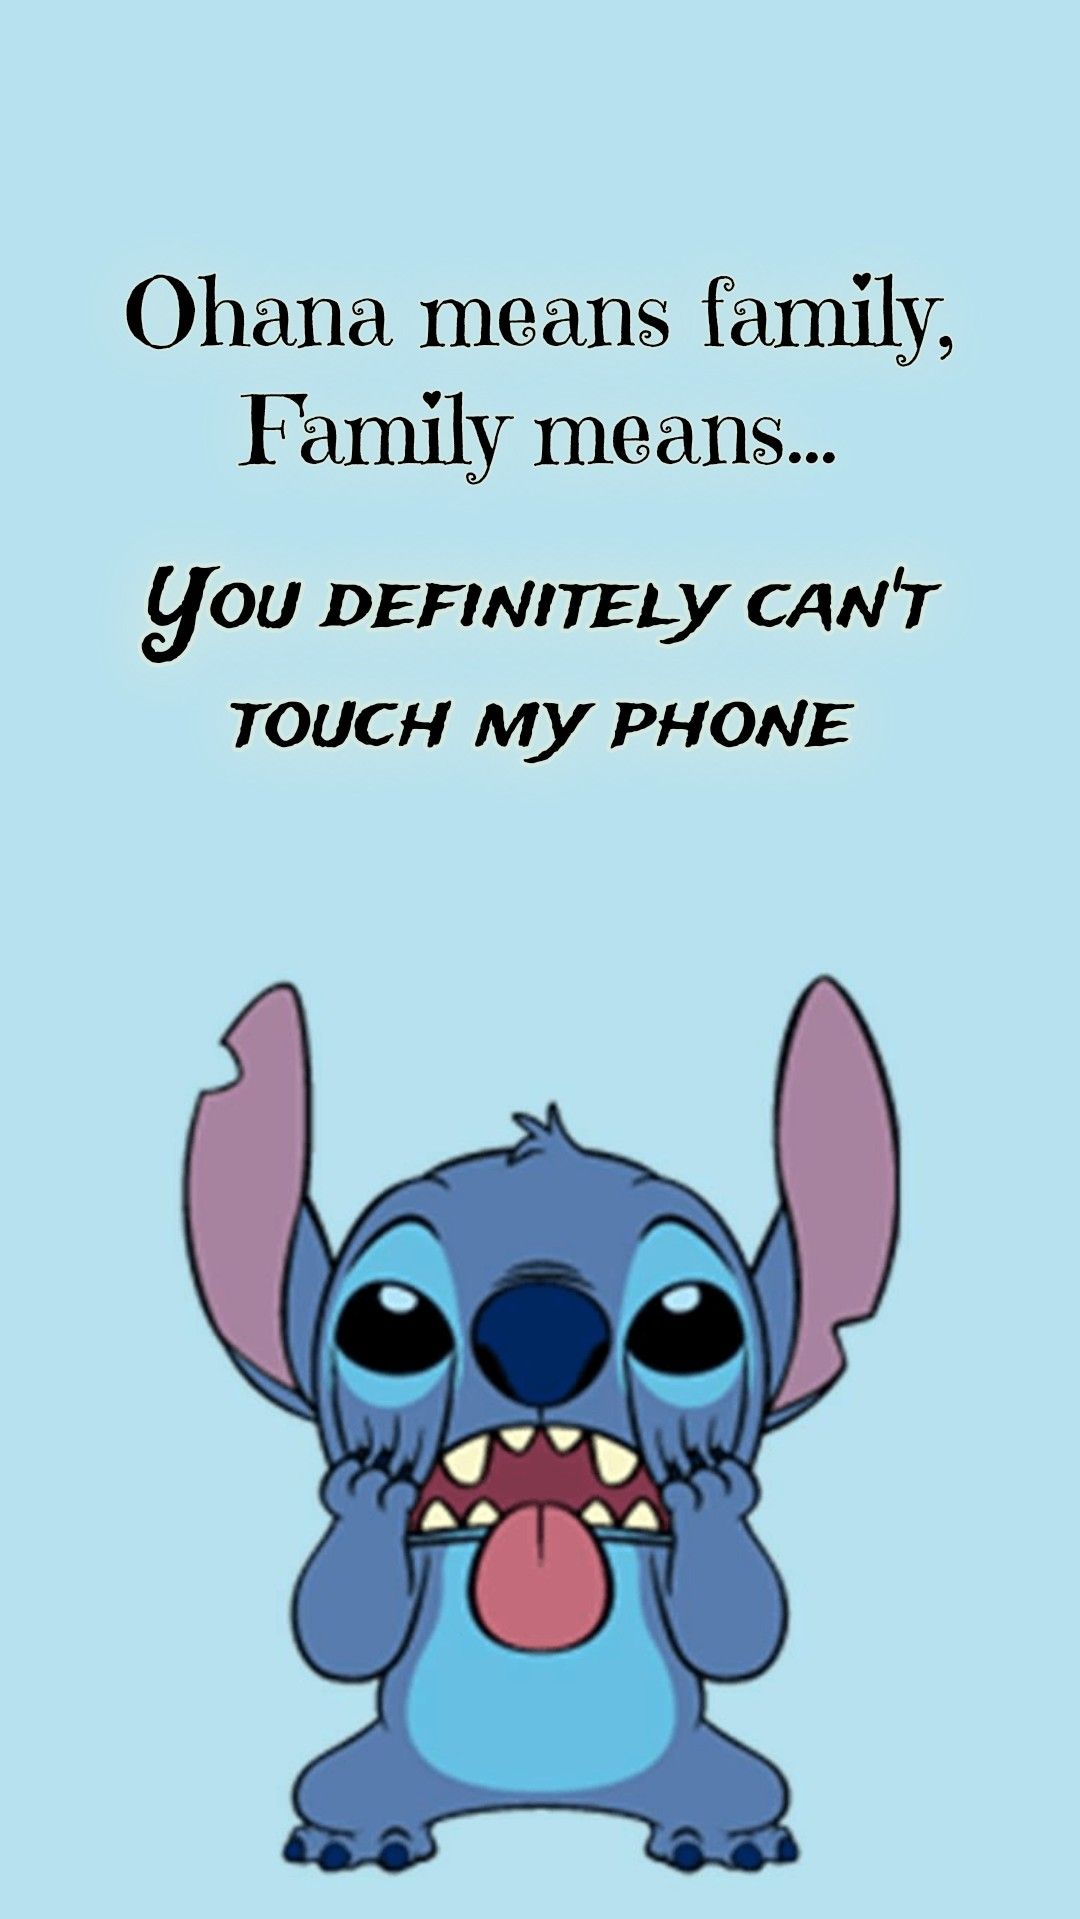 Ohana dont touch wallpaper. iPhone wallpaper quotes funny, Lilo and stitch quotes, Lilo and stitch drawings